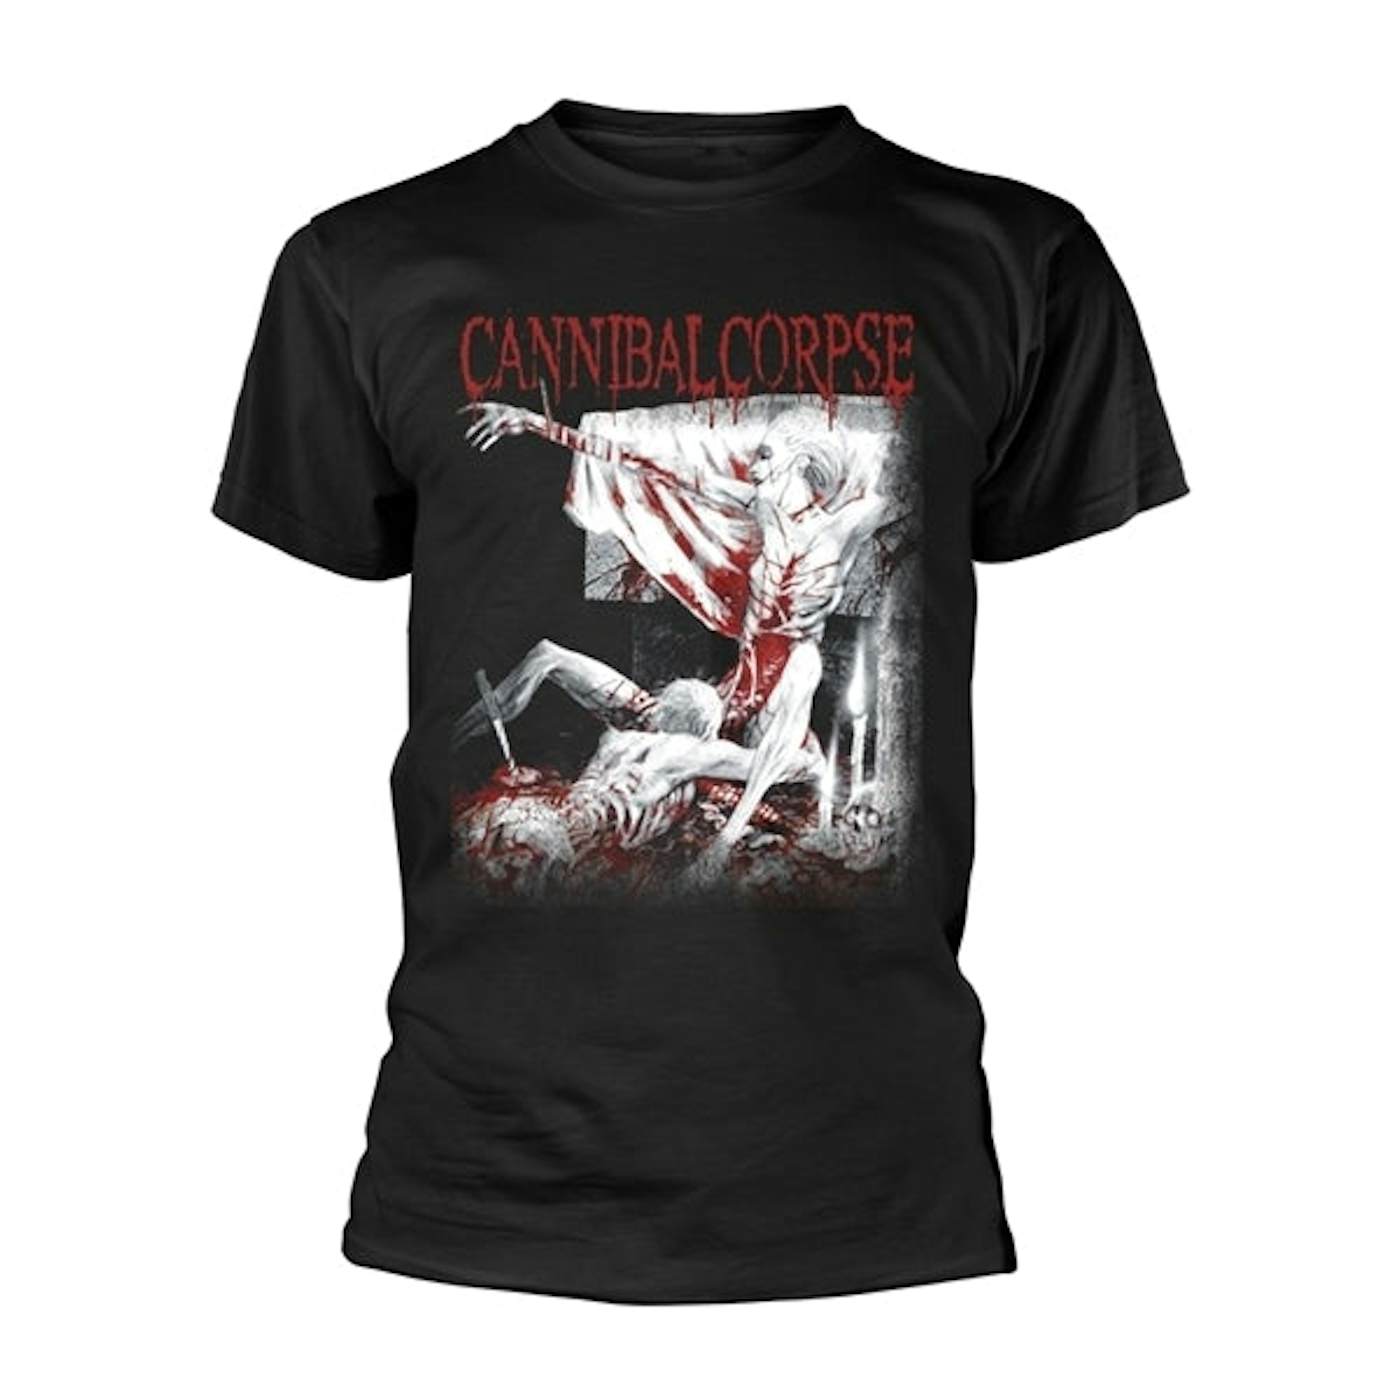 Cannibal Corpse T-Shirt - Tomb Of The Mutilated (Explicit)